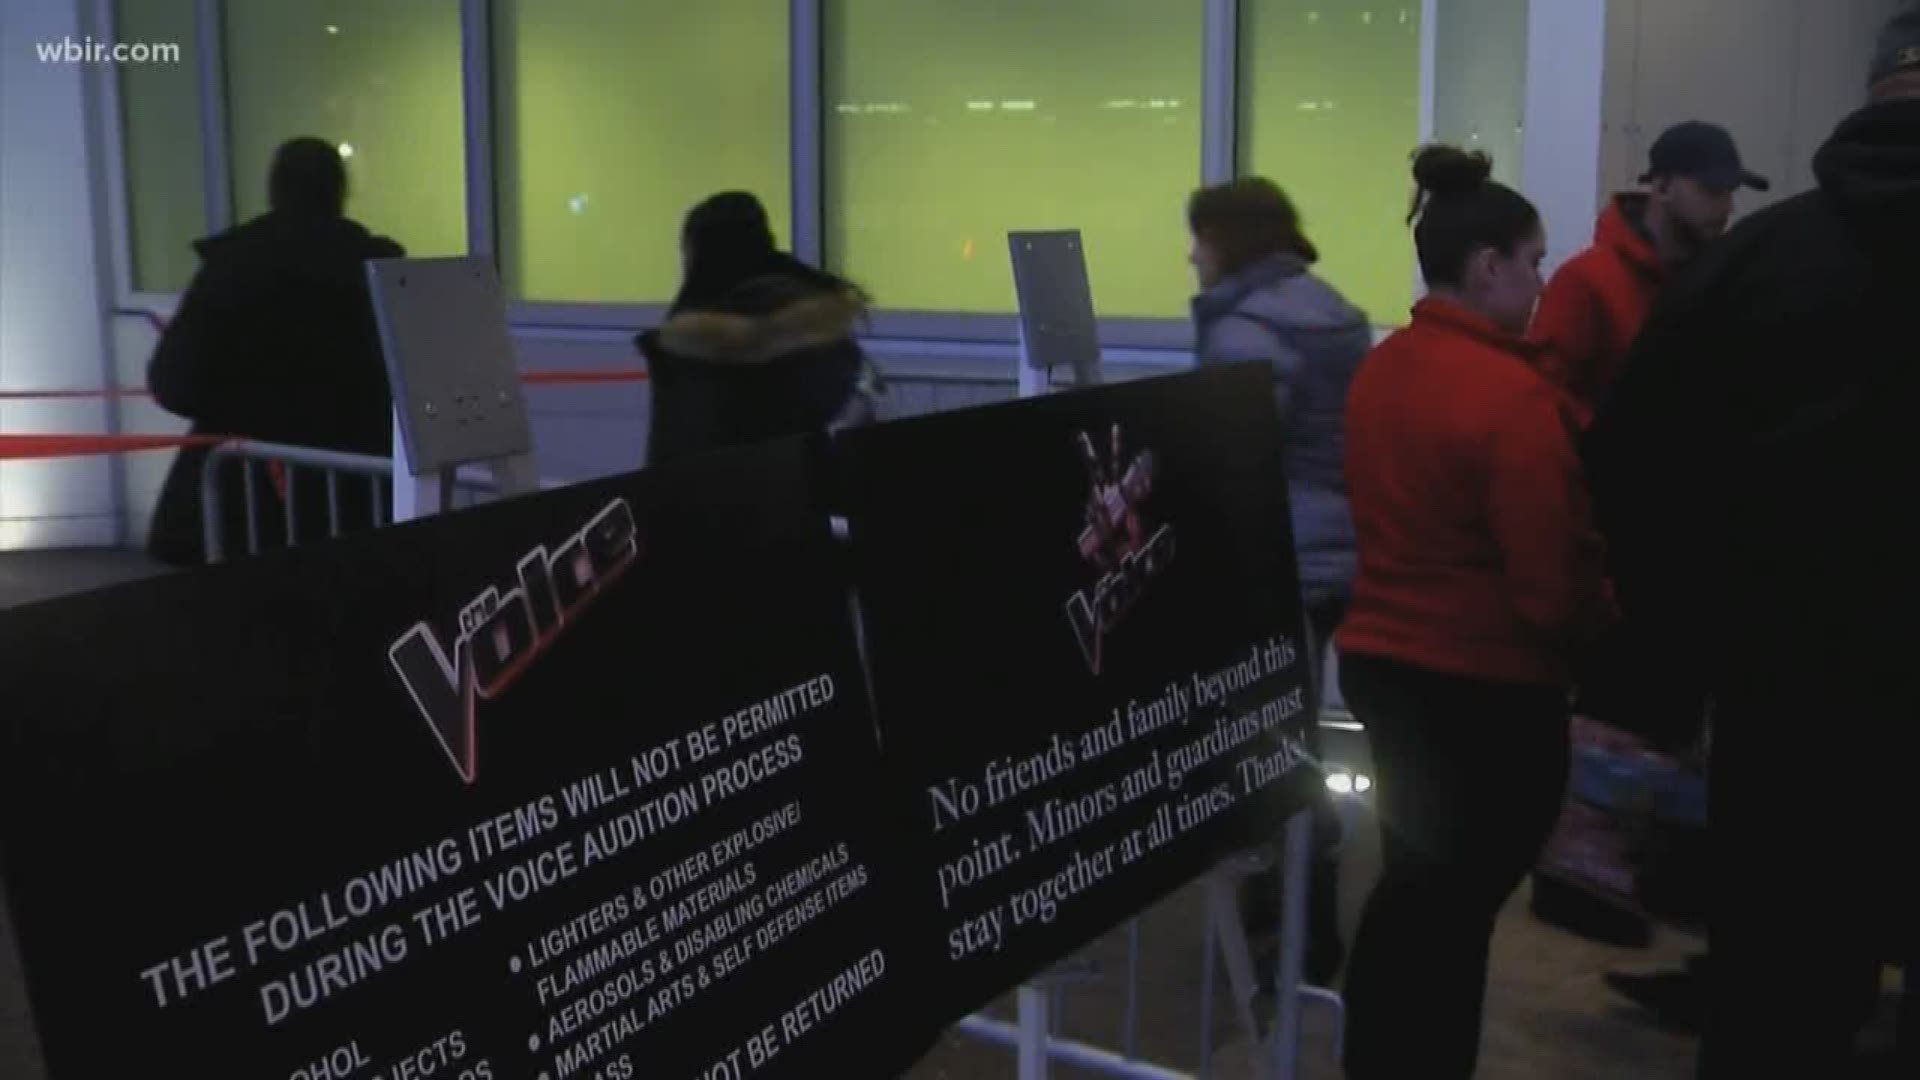 The Voice will hold open casting calls in Nashville on February 16.